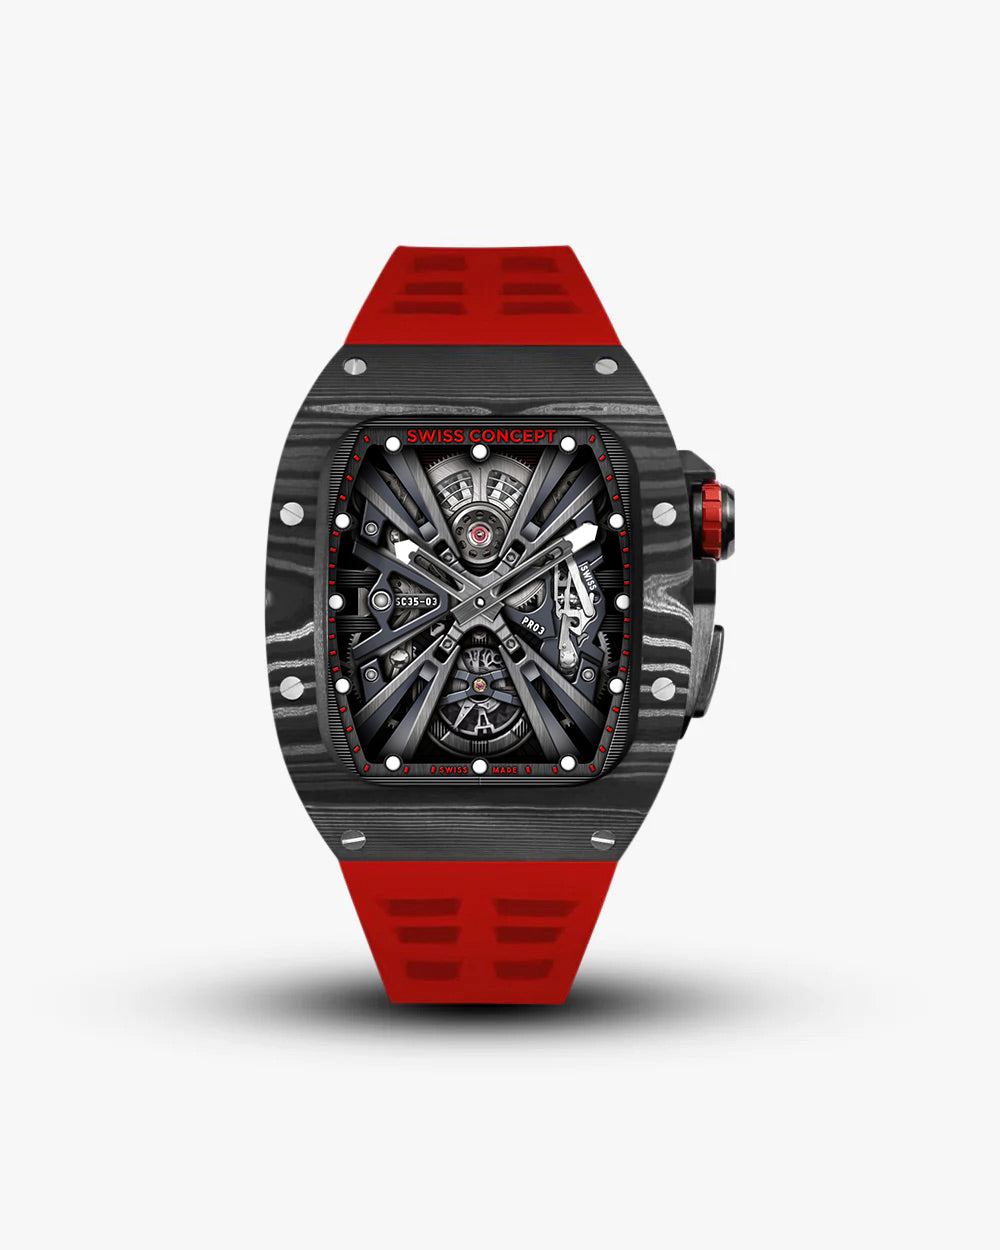 Swiss Concept Racing Elite Edition Nero Forged Carbon, Matte Black & Rosso Red - Swiss Design